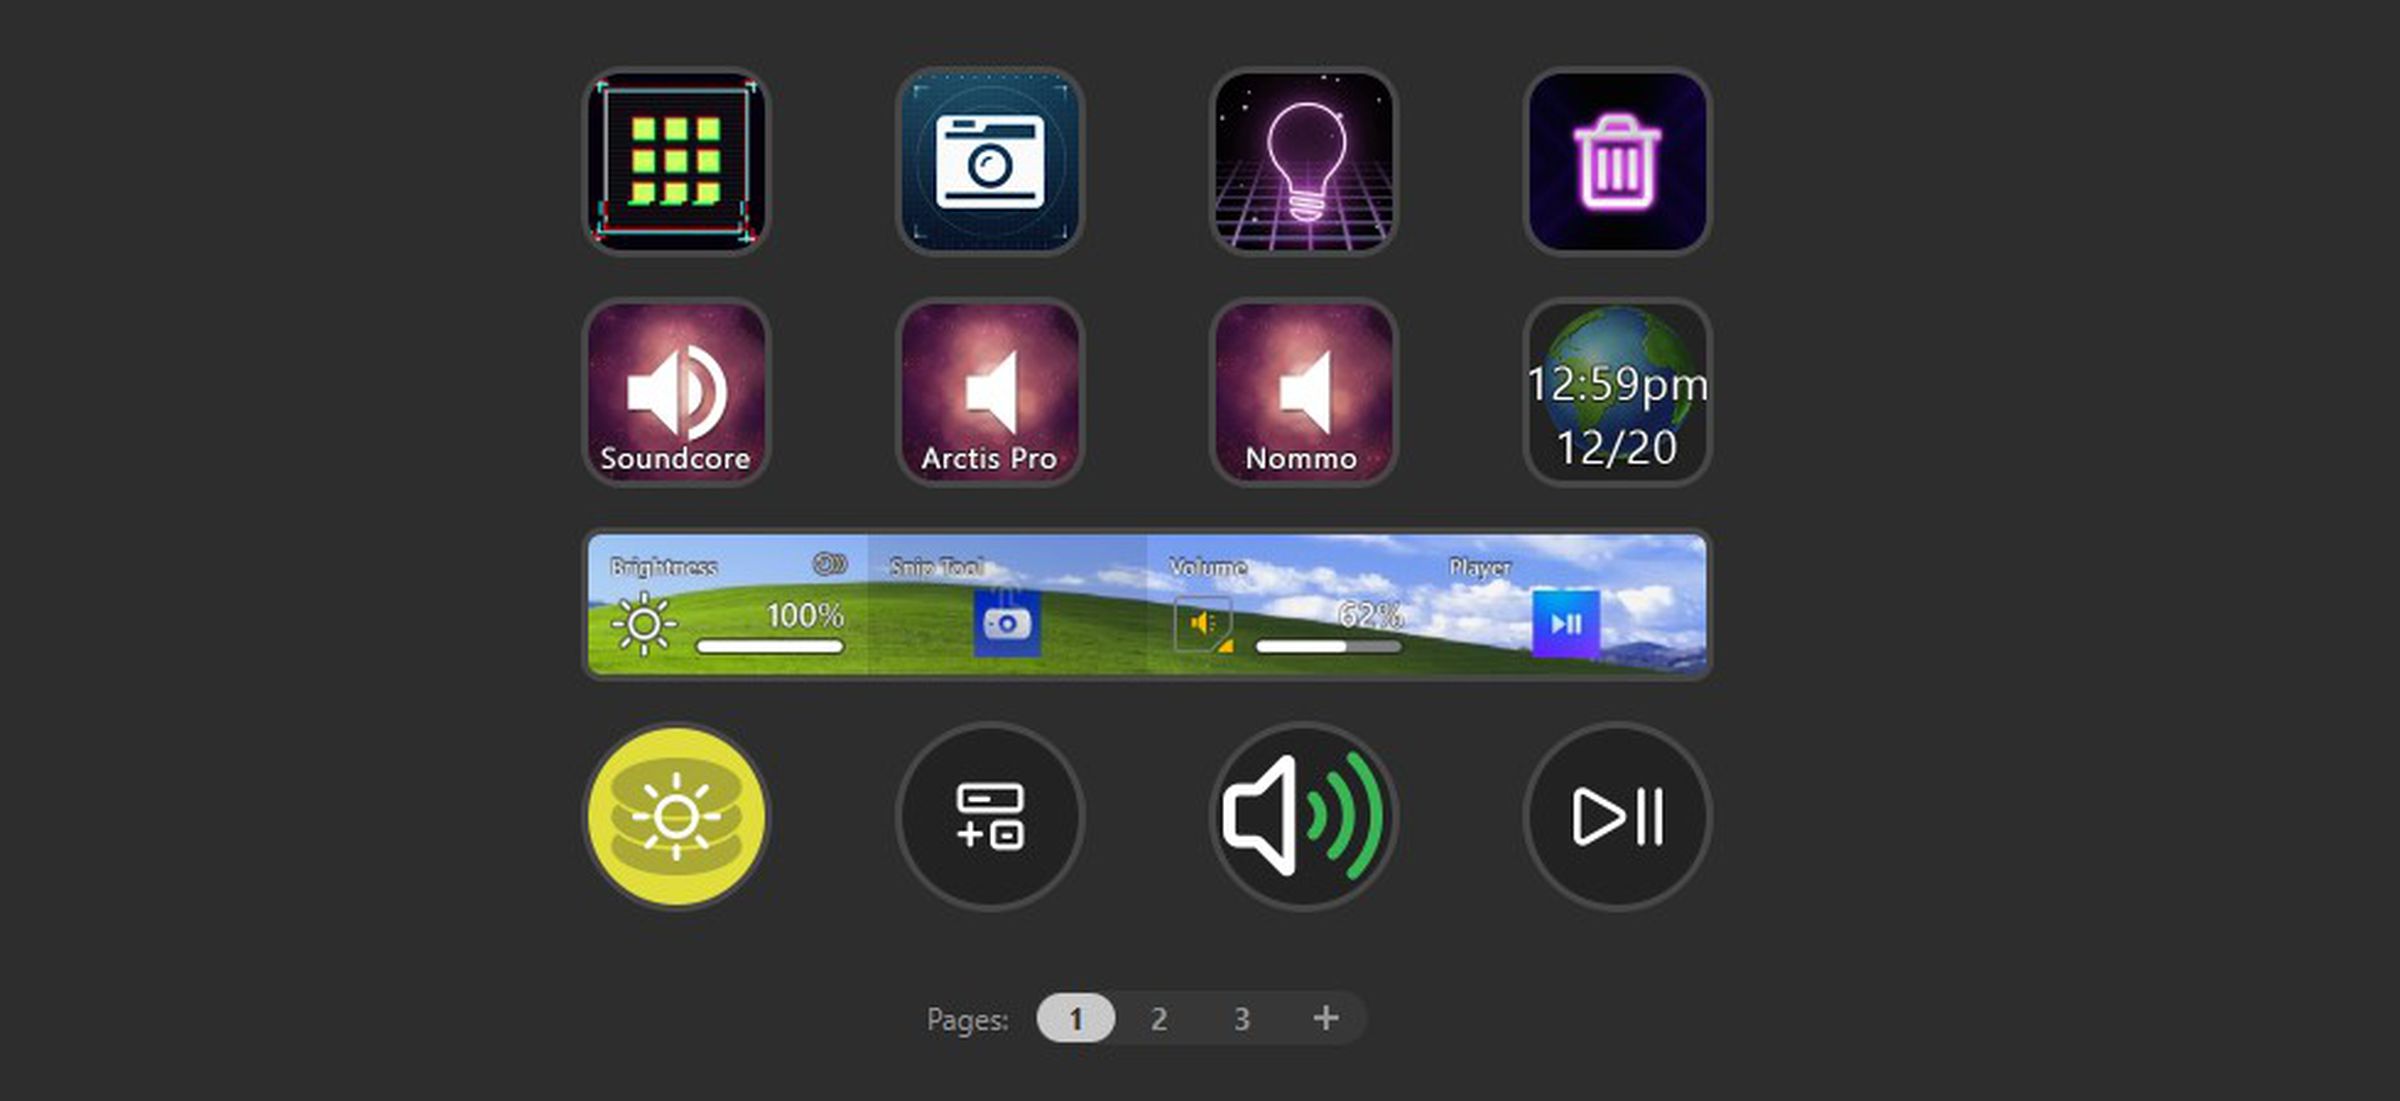 My current Stream Deck profile allows me to control media playback, my office smart lighting, and some additional desktop features.